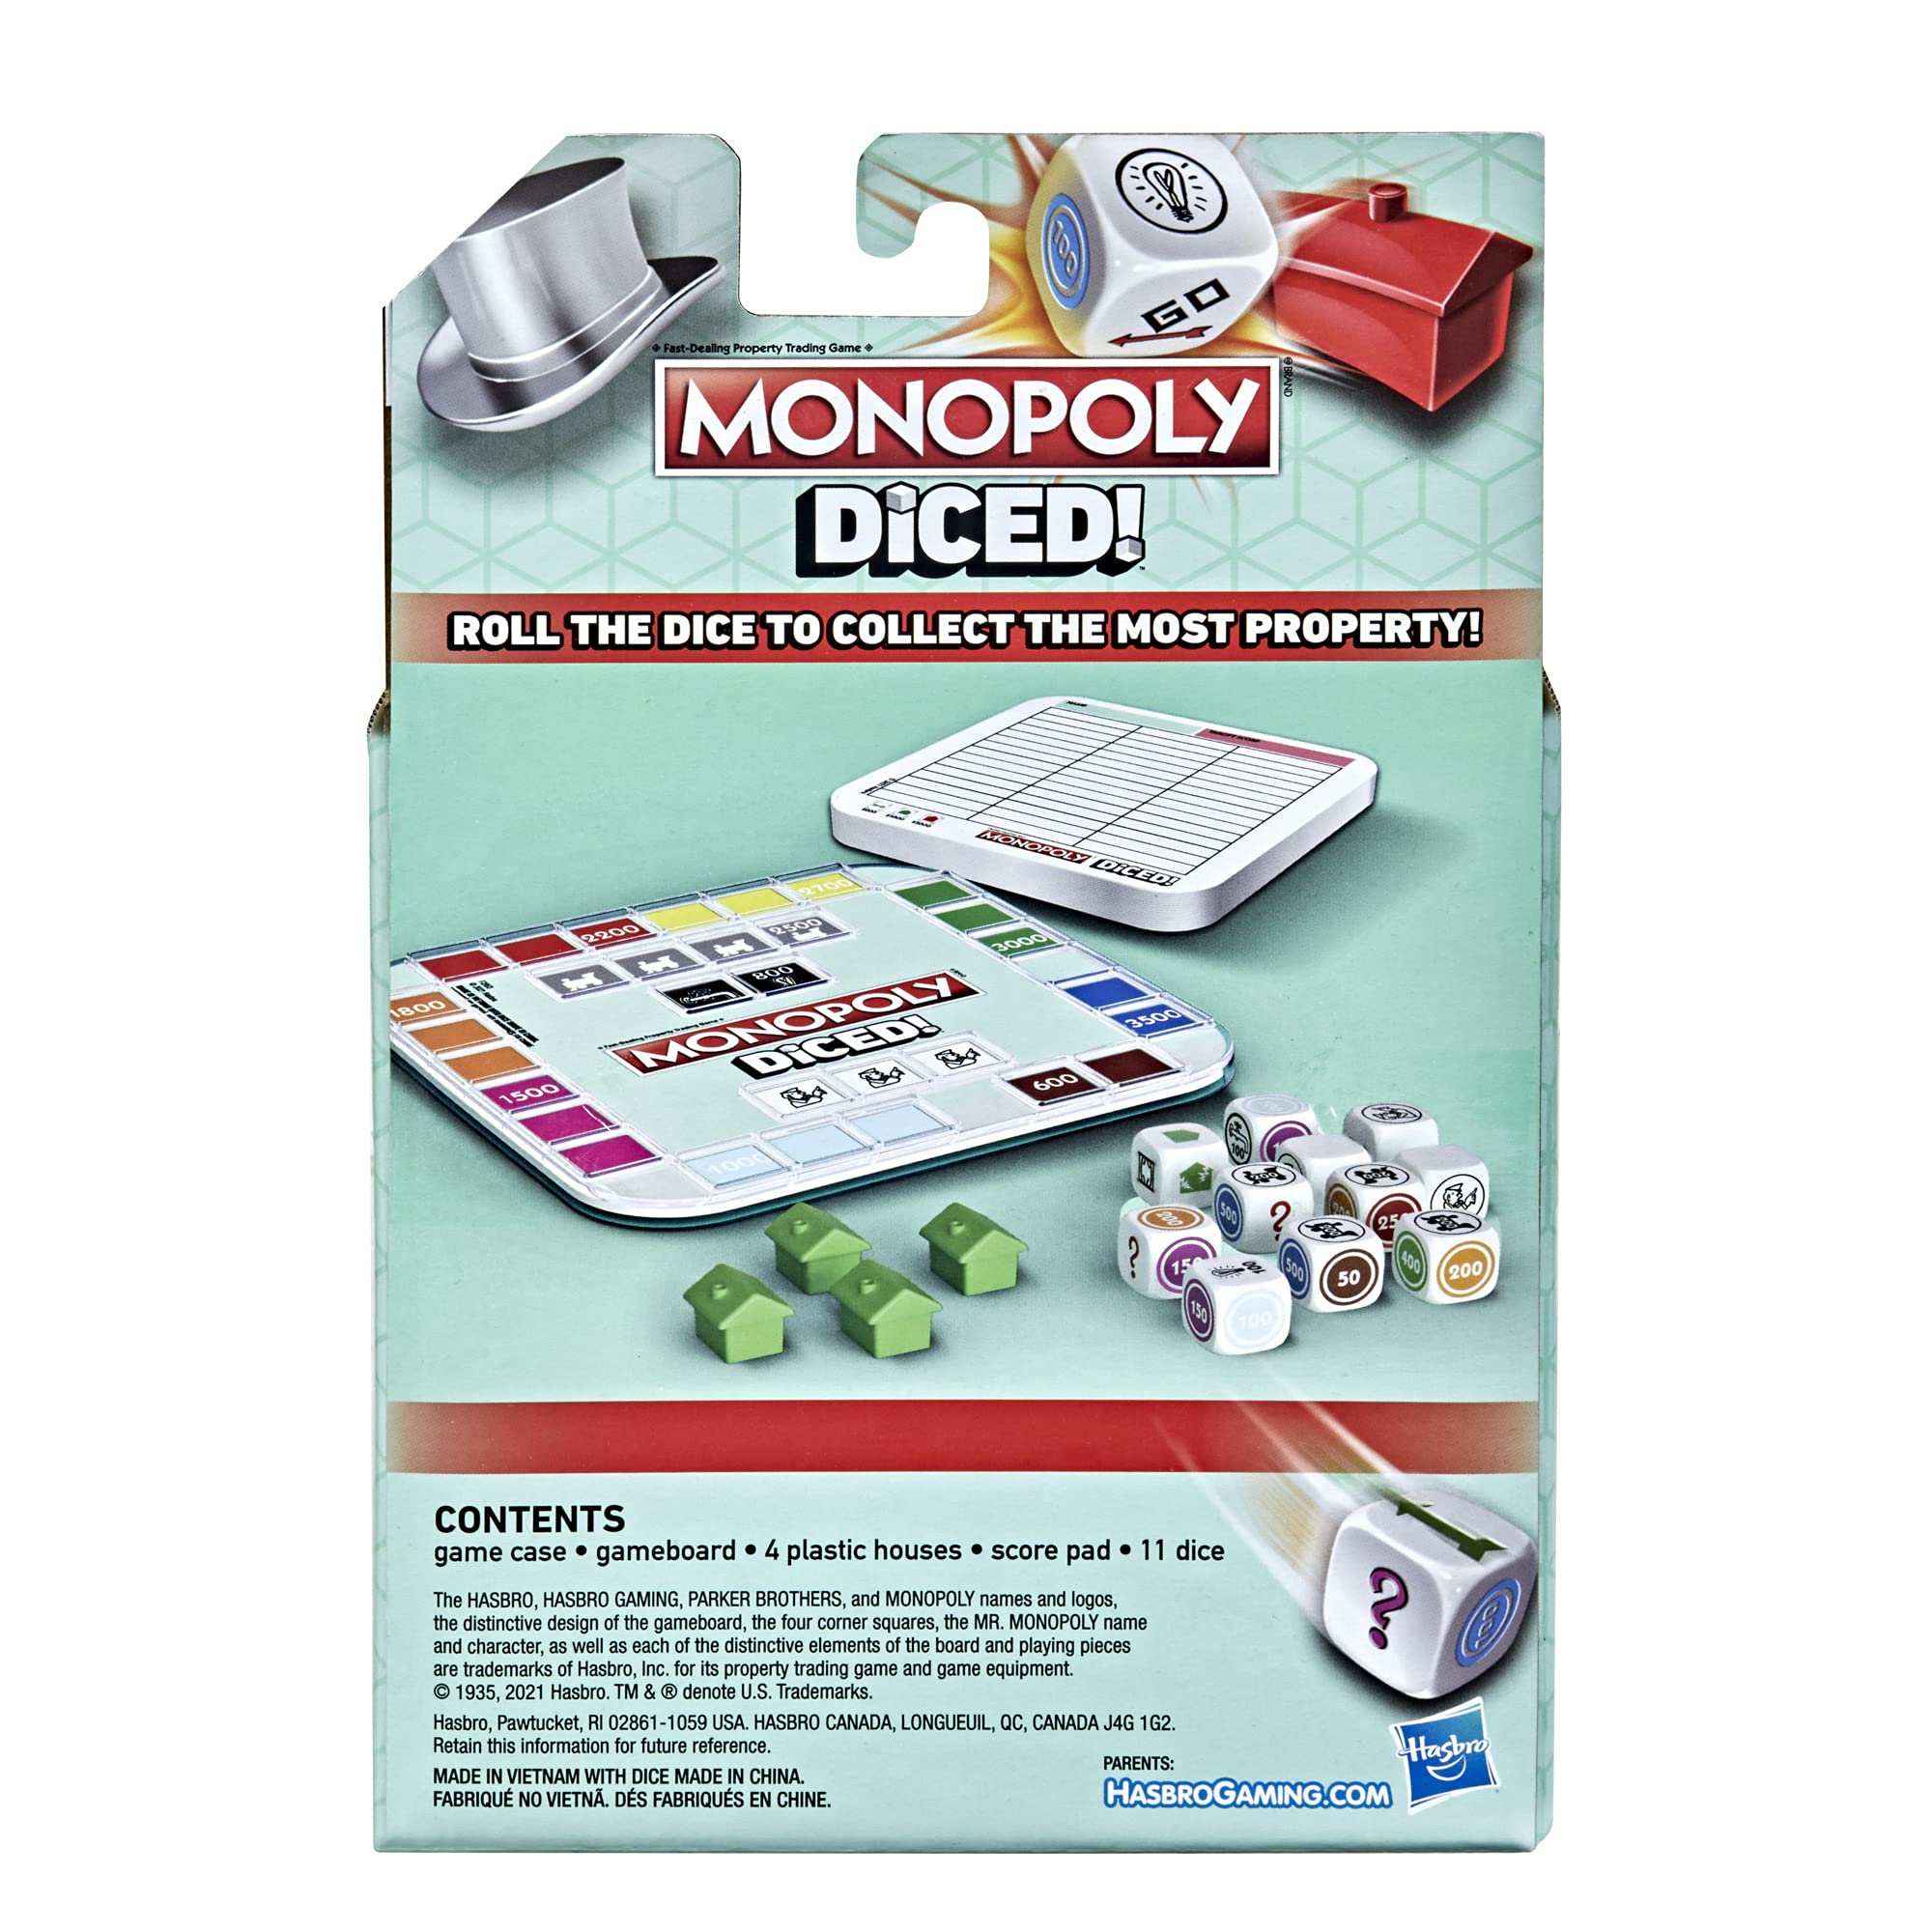 MONOPOLY Diced Game, Easy to Learn Game, Quick Game, Portable Travel Board Game, Fast Game for Kids Ages 8 and Up